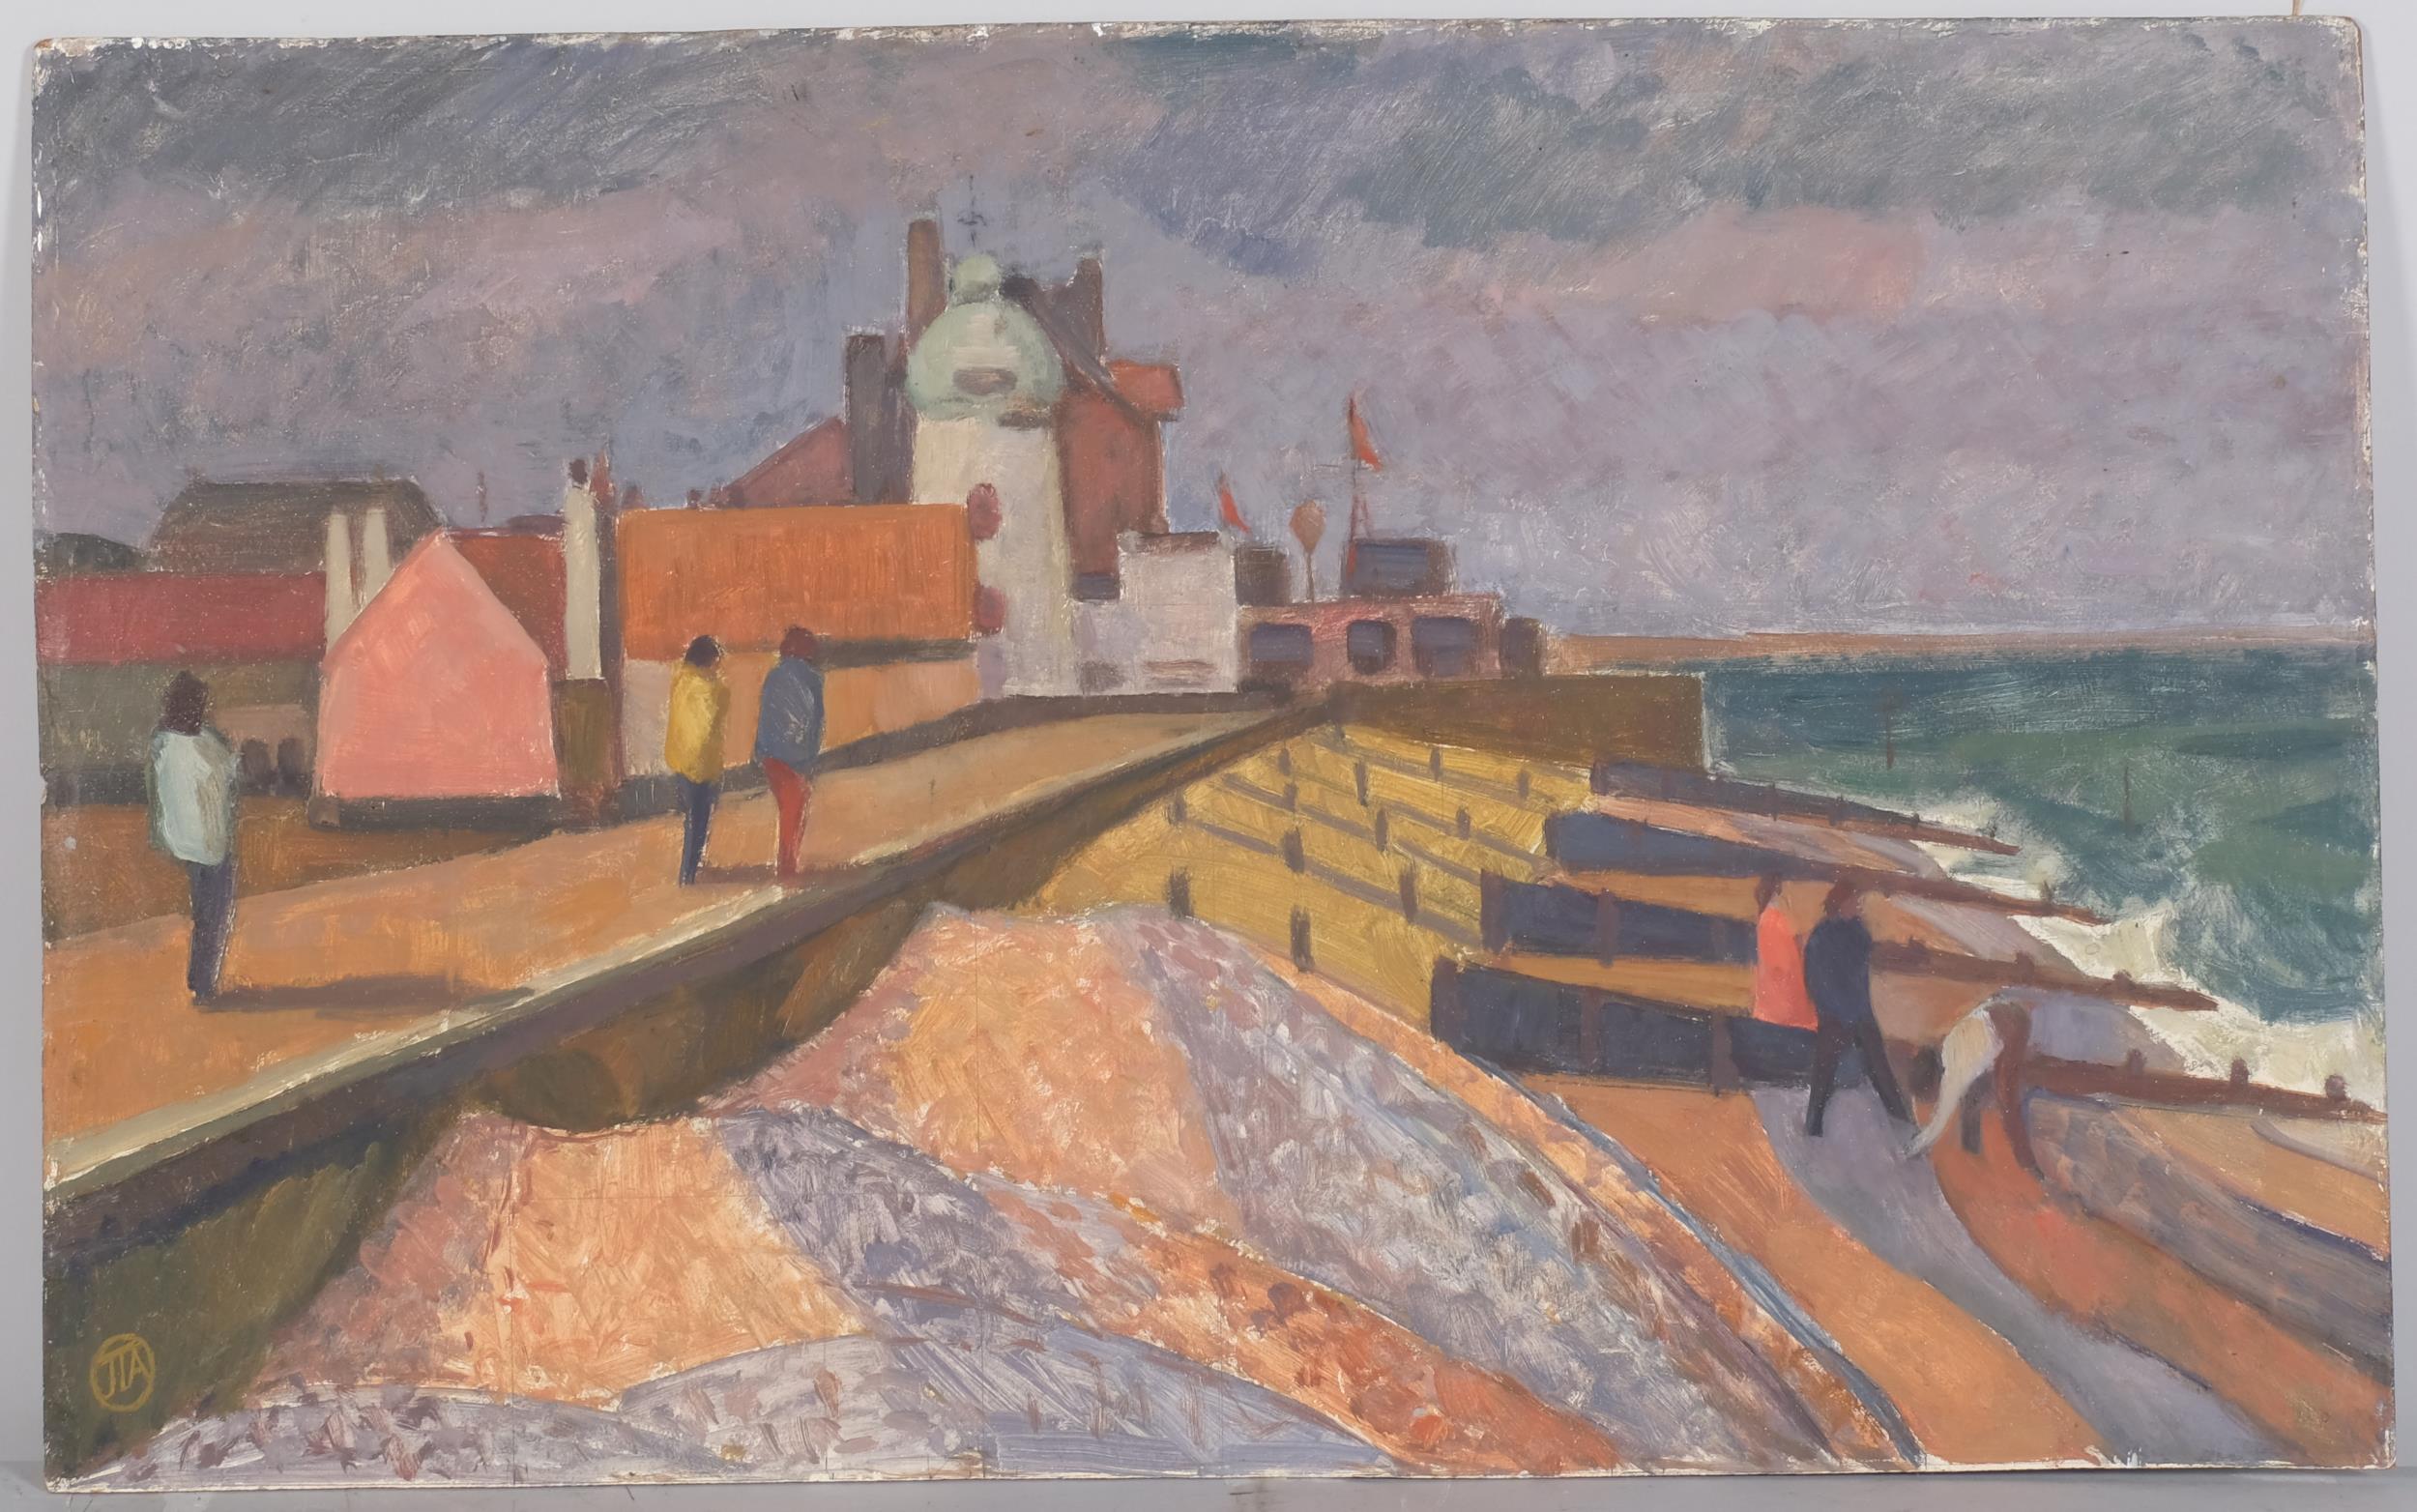 James T A Osborne, stormy weather Aldeburgh, oil on board, circa 1960, signed with monogram,